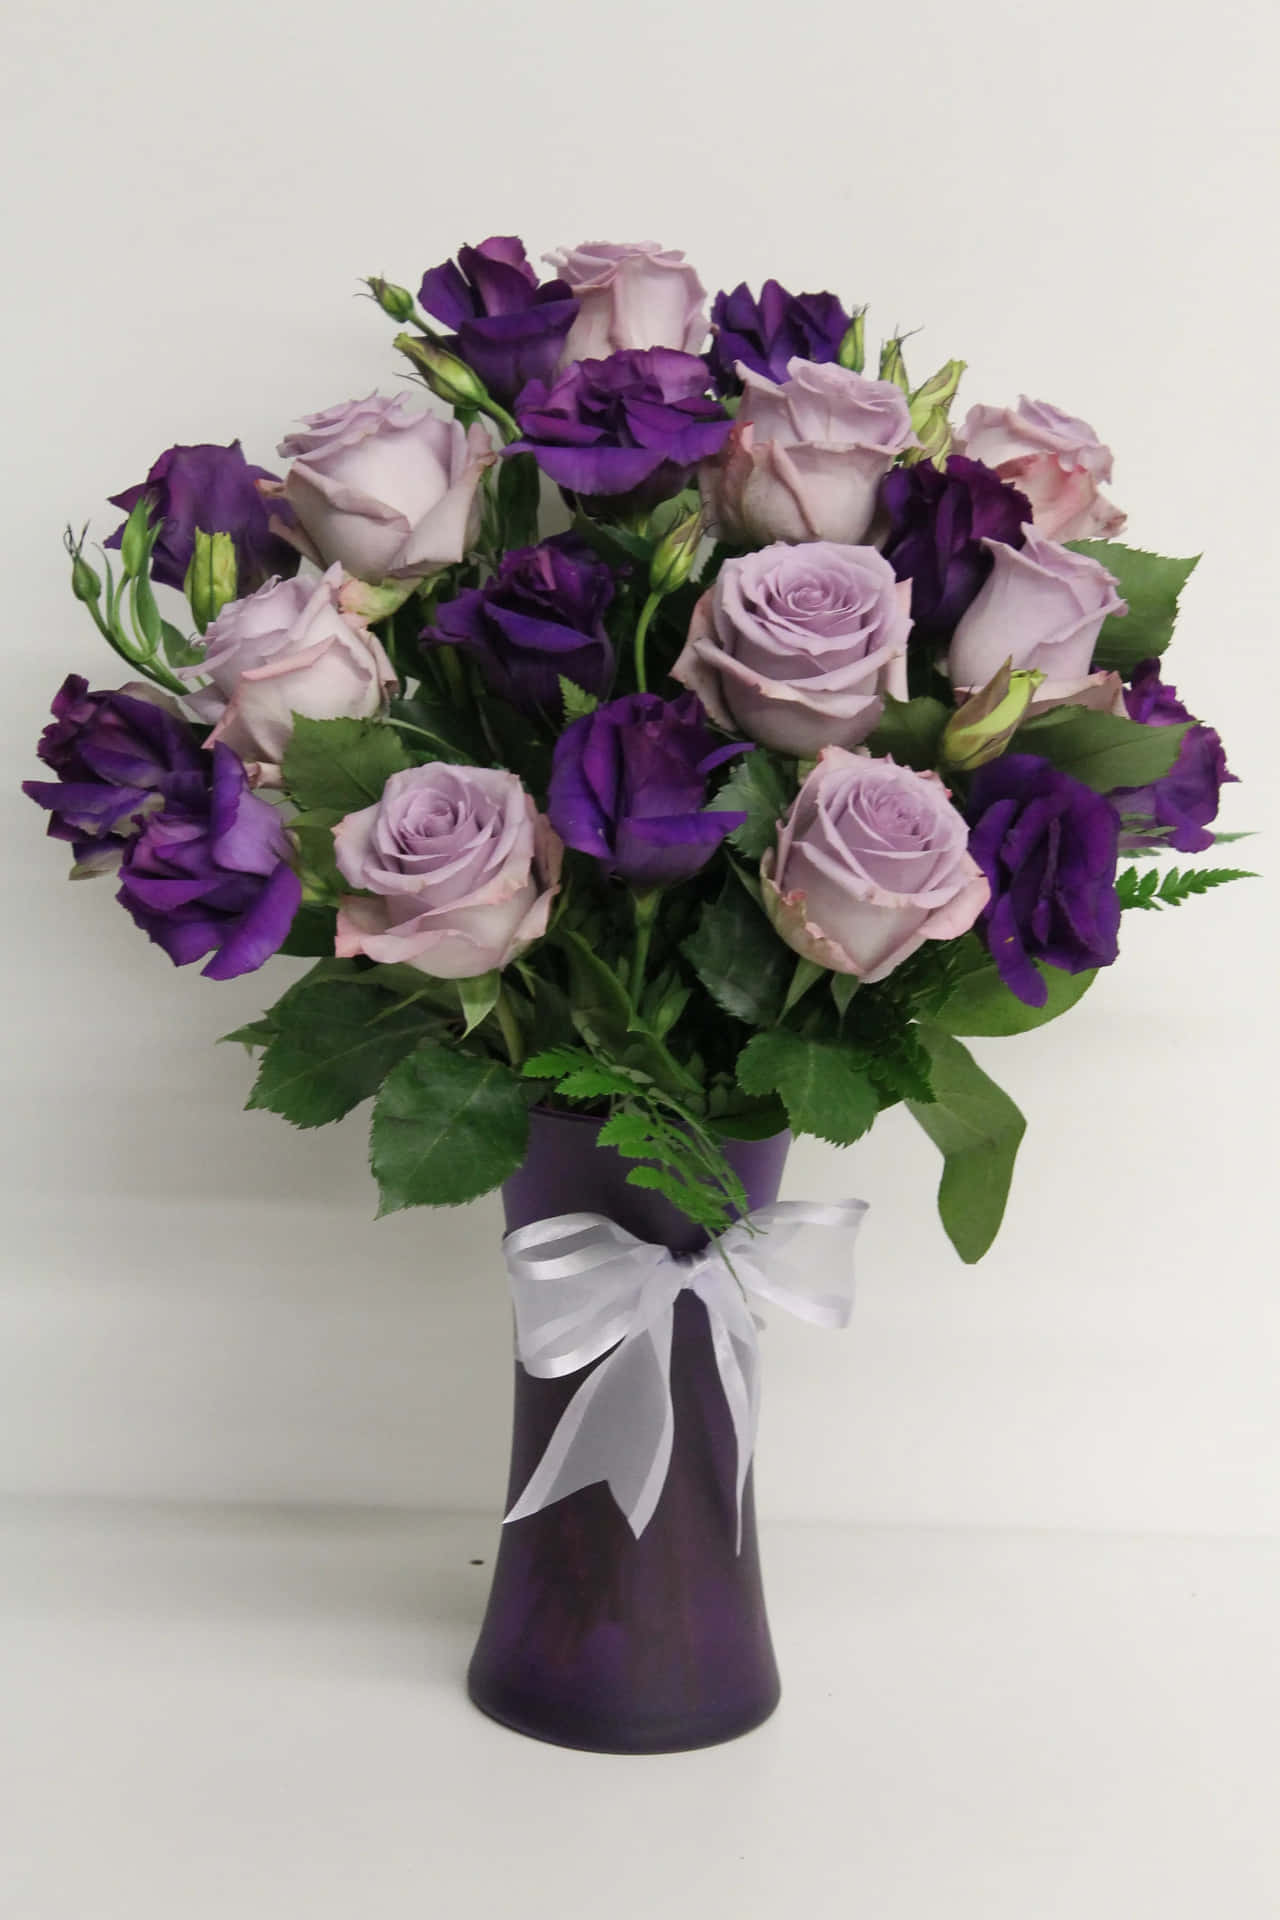 A gorgeous flower bouquet perfect for any special occasion.